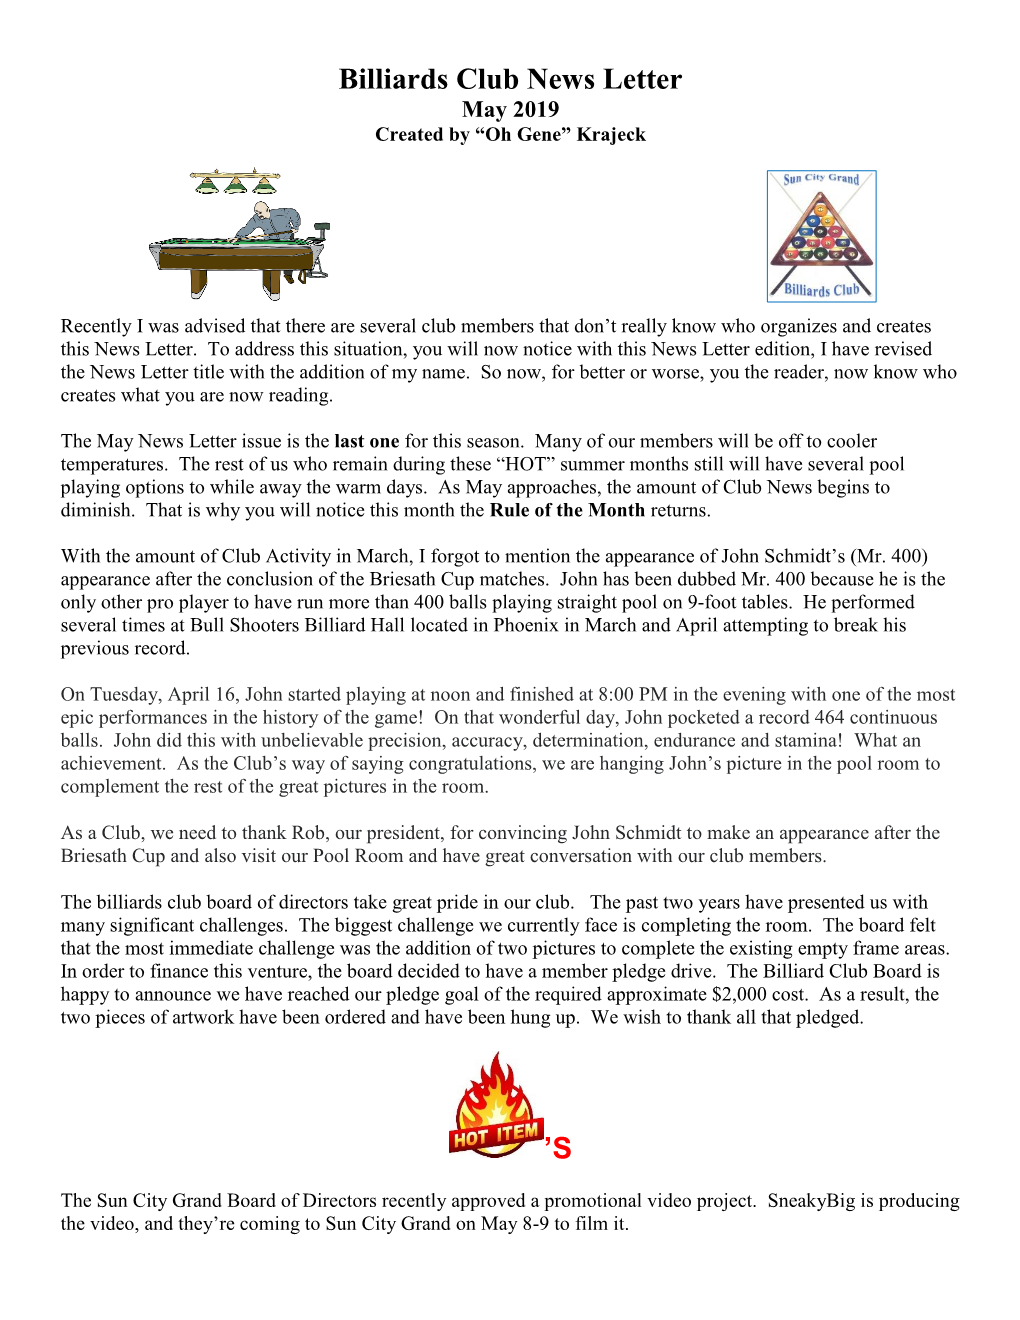 Billiards Club News Letter May 2019 Created by “Oh Gene” Krajeck